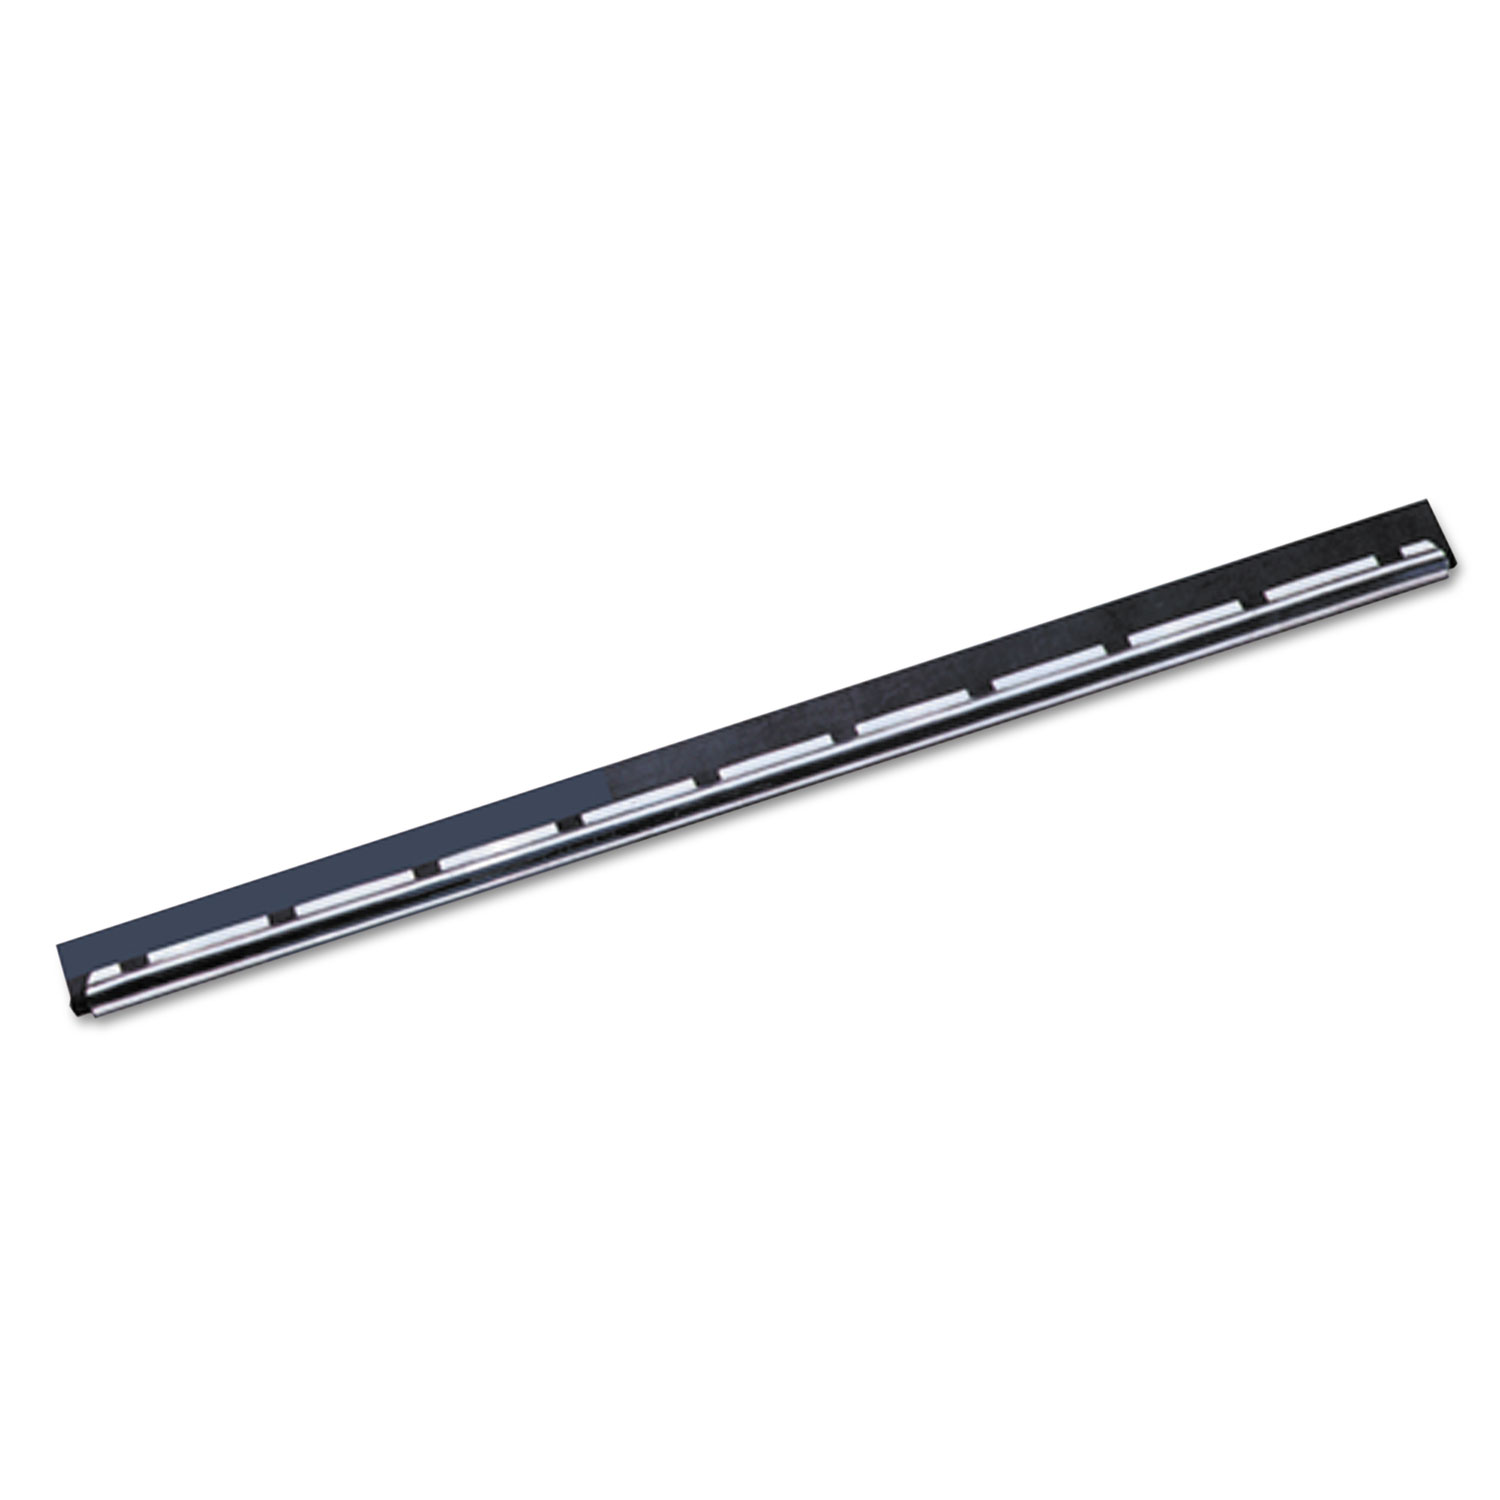  Unger NE400 Stainless Steel S Channel 16 with Soft Rubber (UNGNE40) 